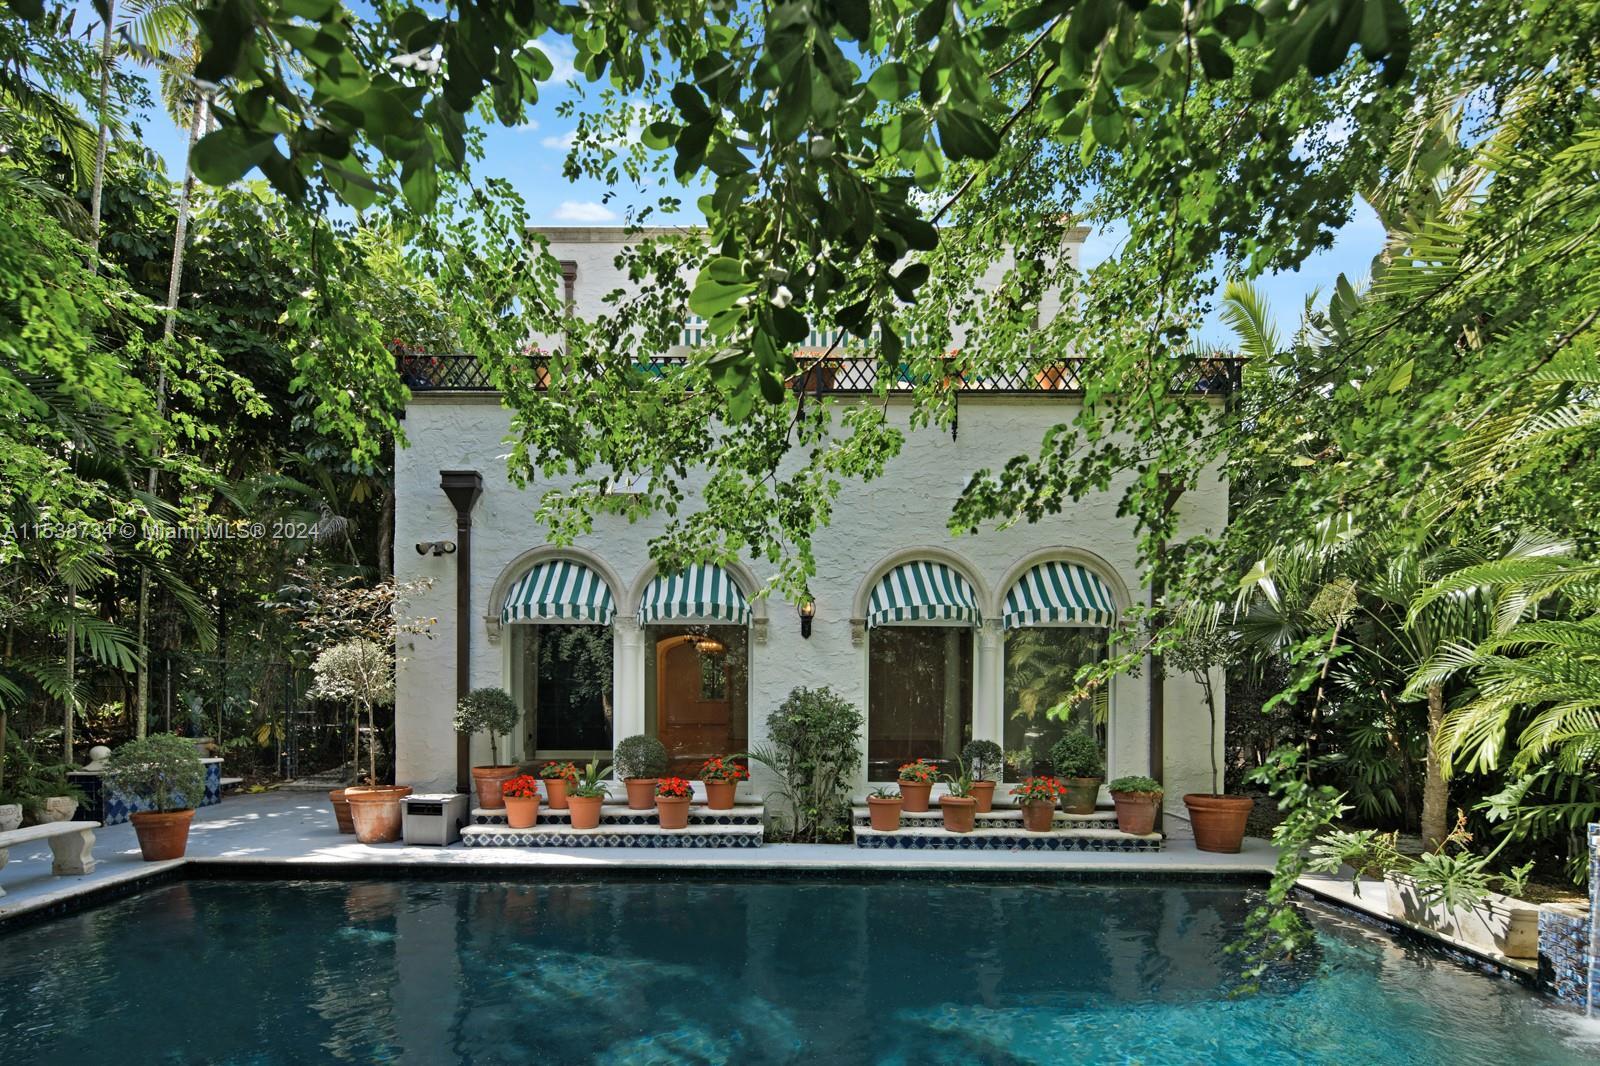 Explore this exceptional opportunity to own “Casa Diva”, a rare vintage Mediterranean-styled villa a